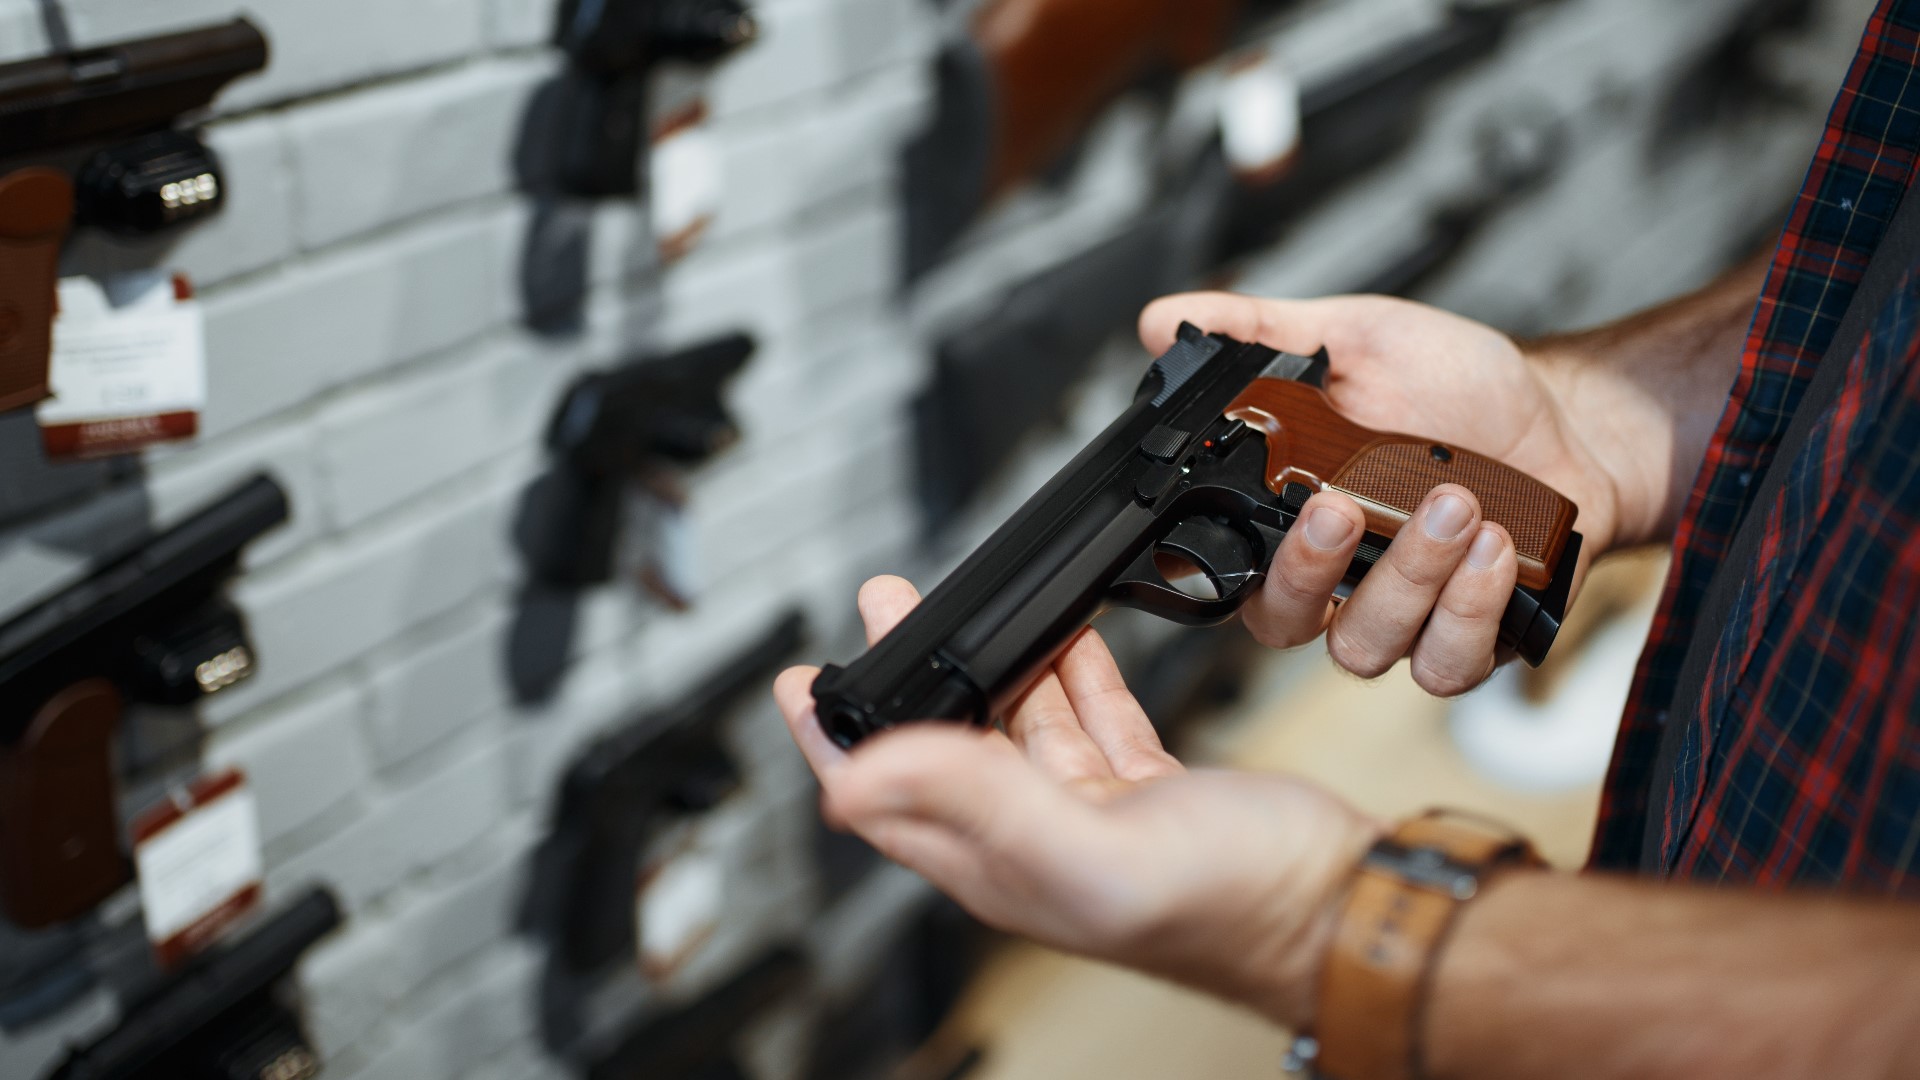 Measure 14 would ban magazines that hold more than 10-rounds. It will require criminal background checks, safety training and other steps before people can buy guns.